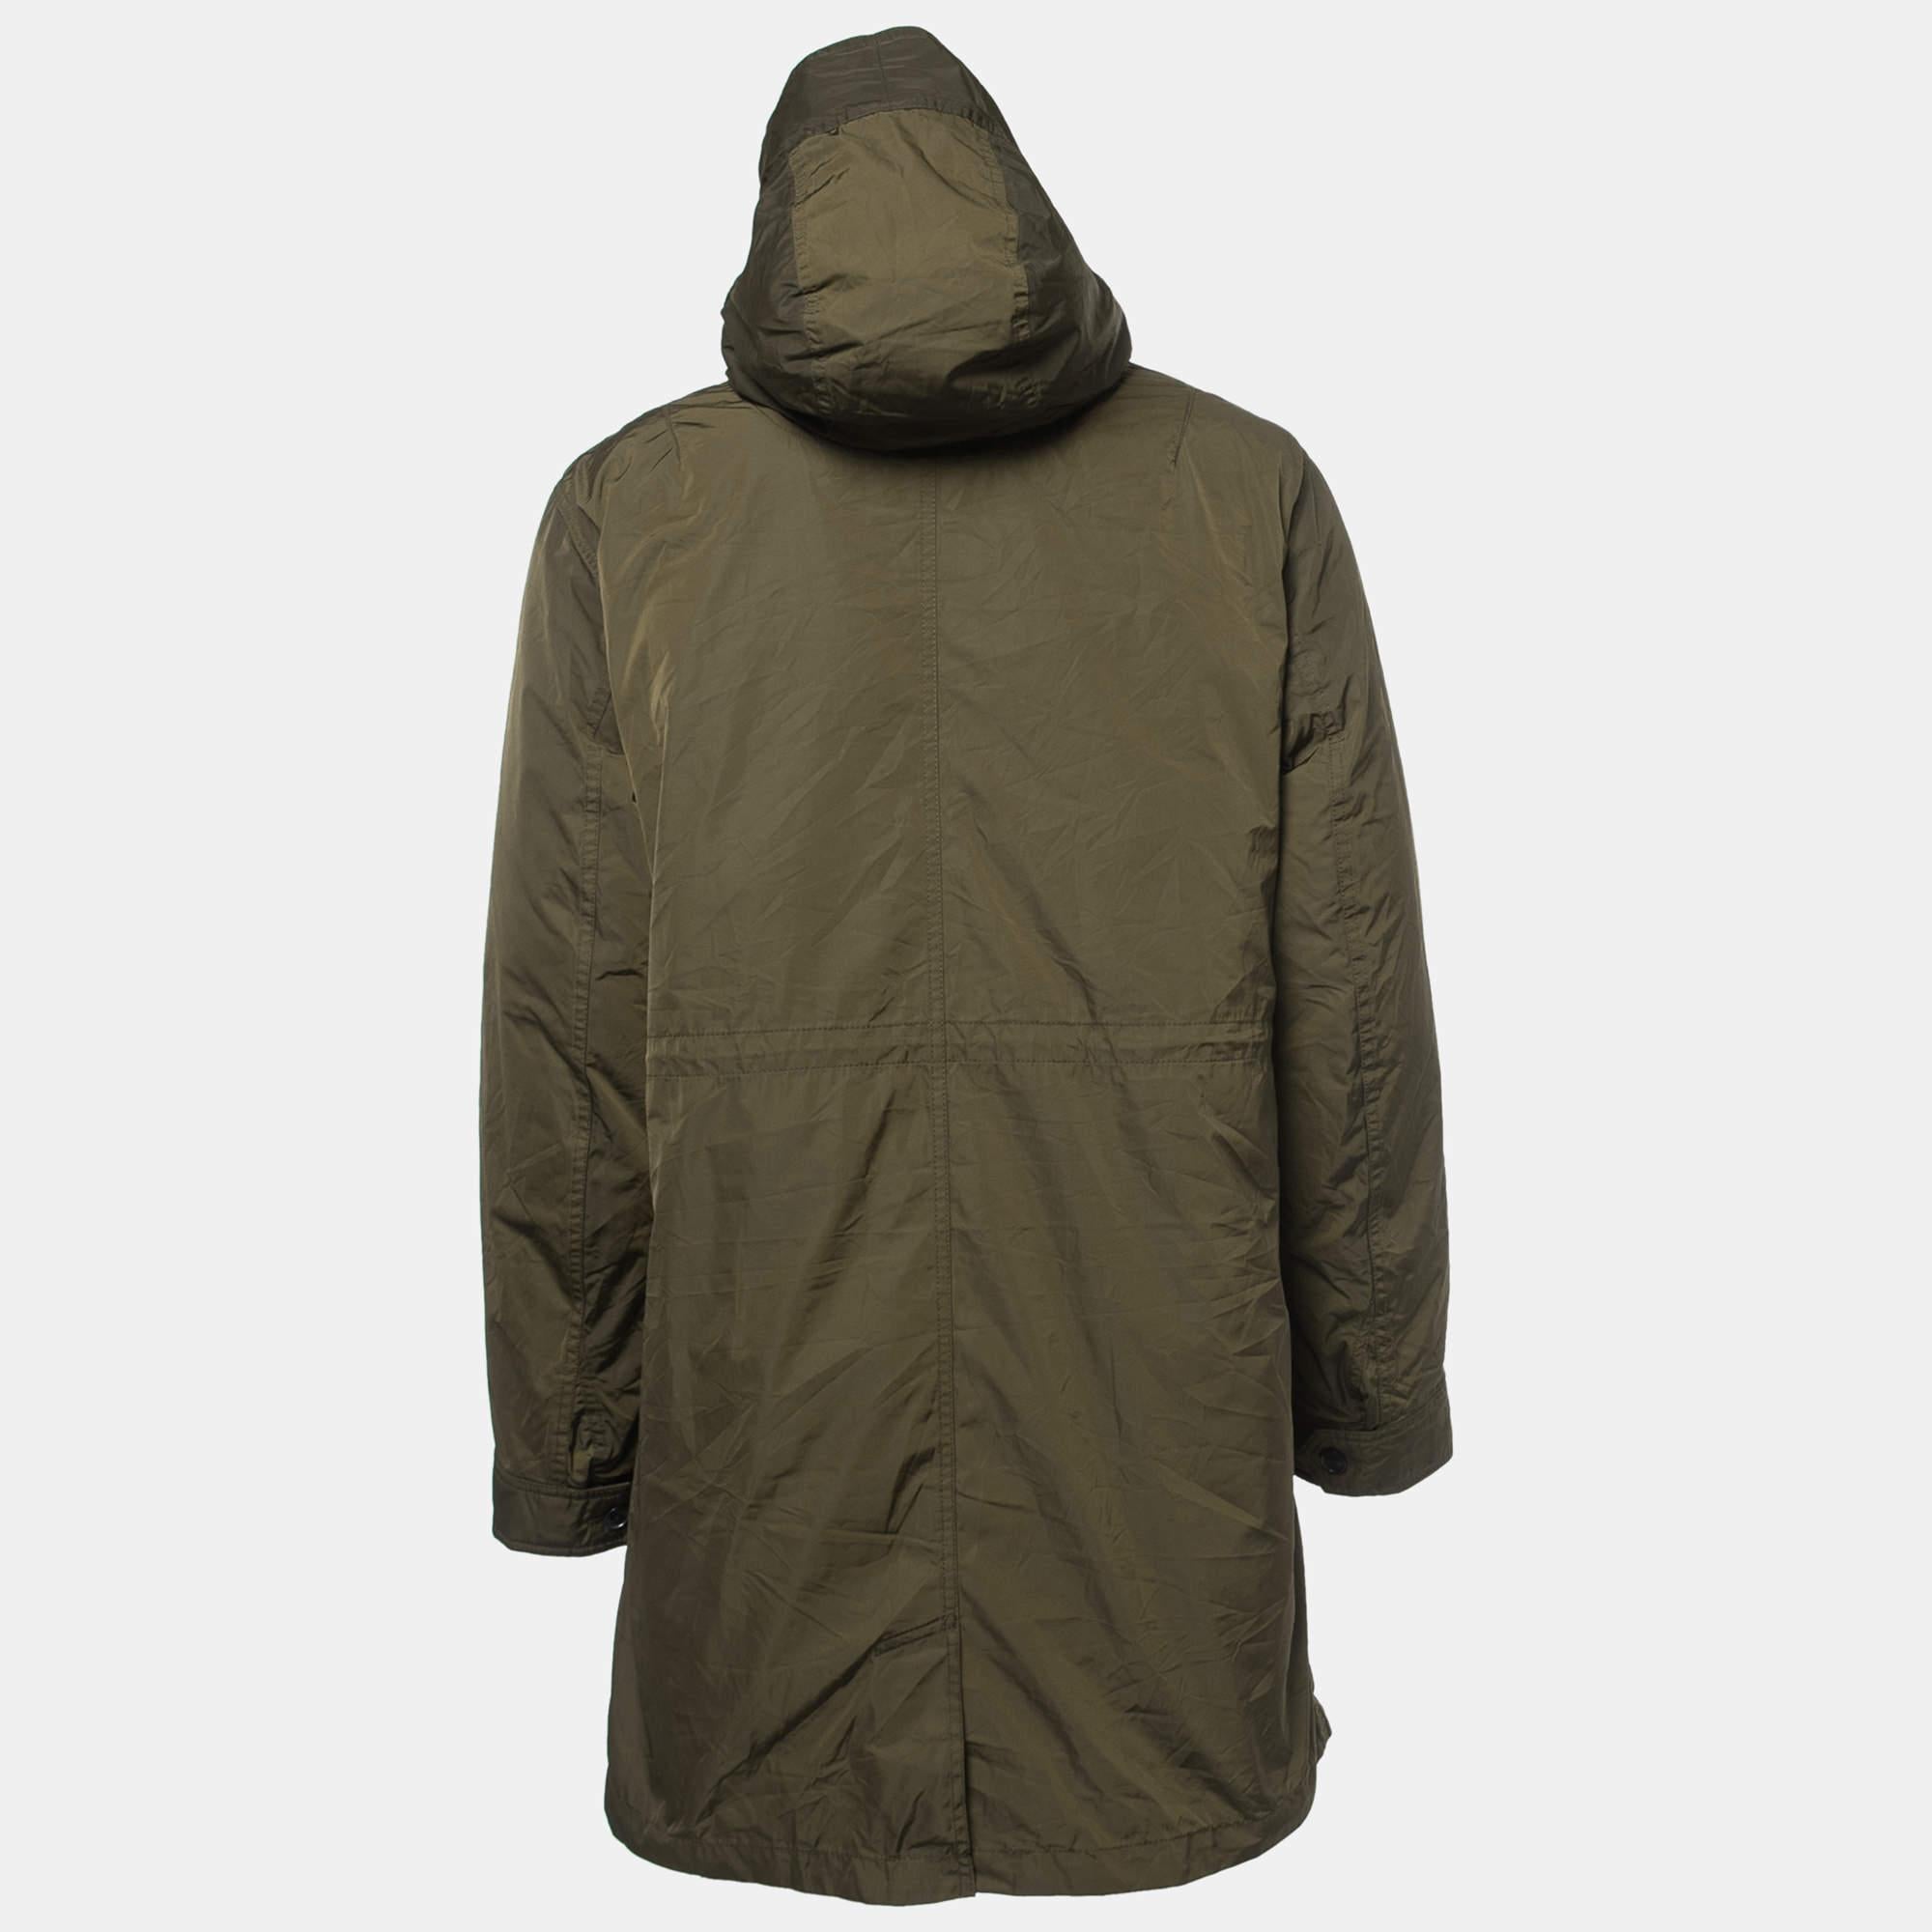 The Zadig & Voltaire Parka jacket is a stylish outerwear piece featuring a rich, dark green color. Made from durable materials, it offers warmth and weather resistance. With a contemporary design and functional elements like pockets and a hood, it's